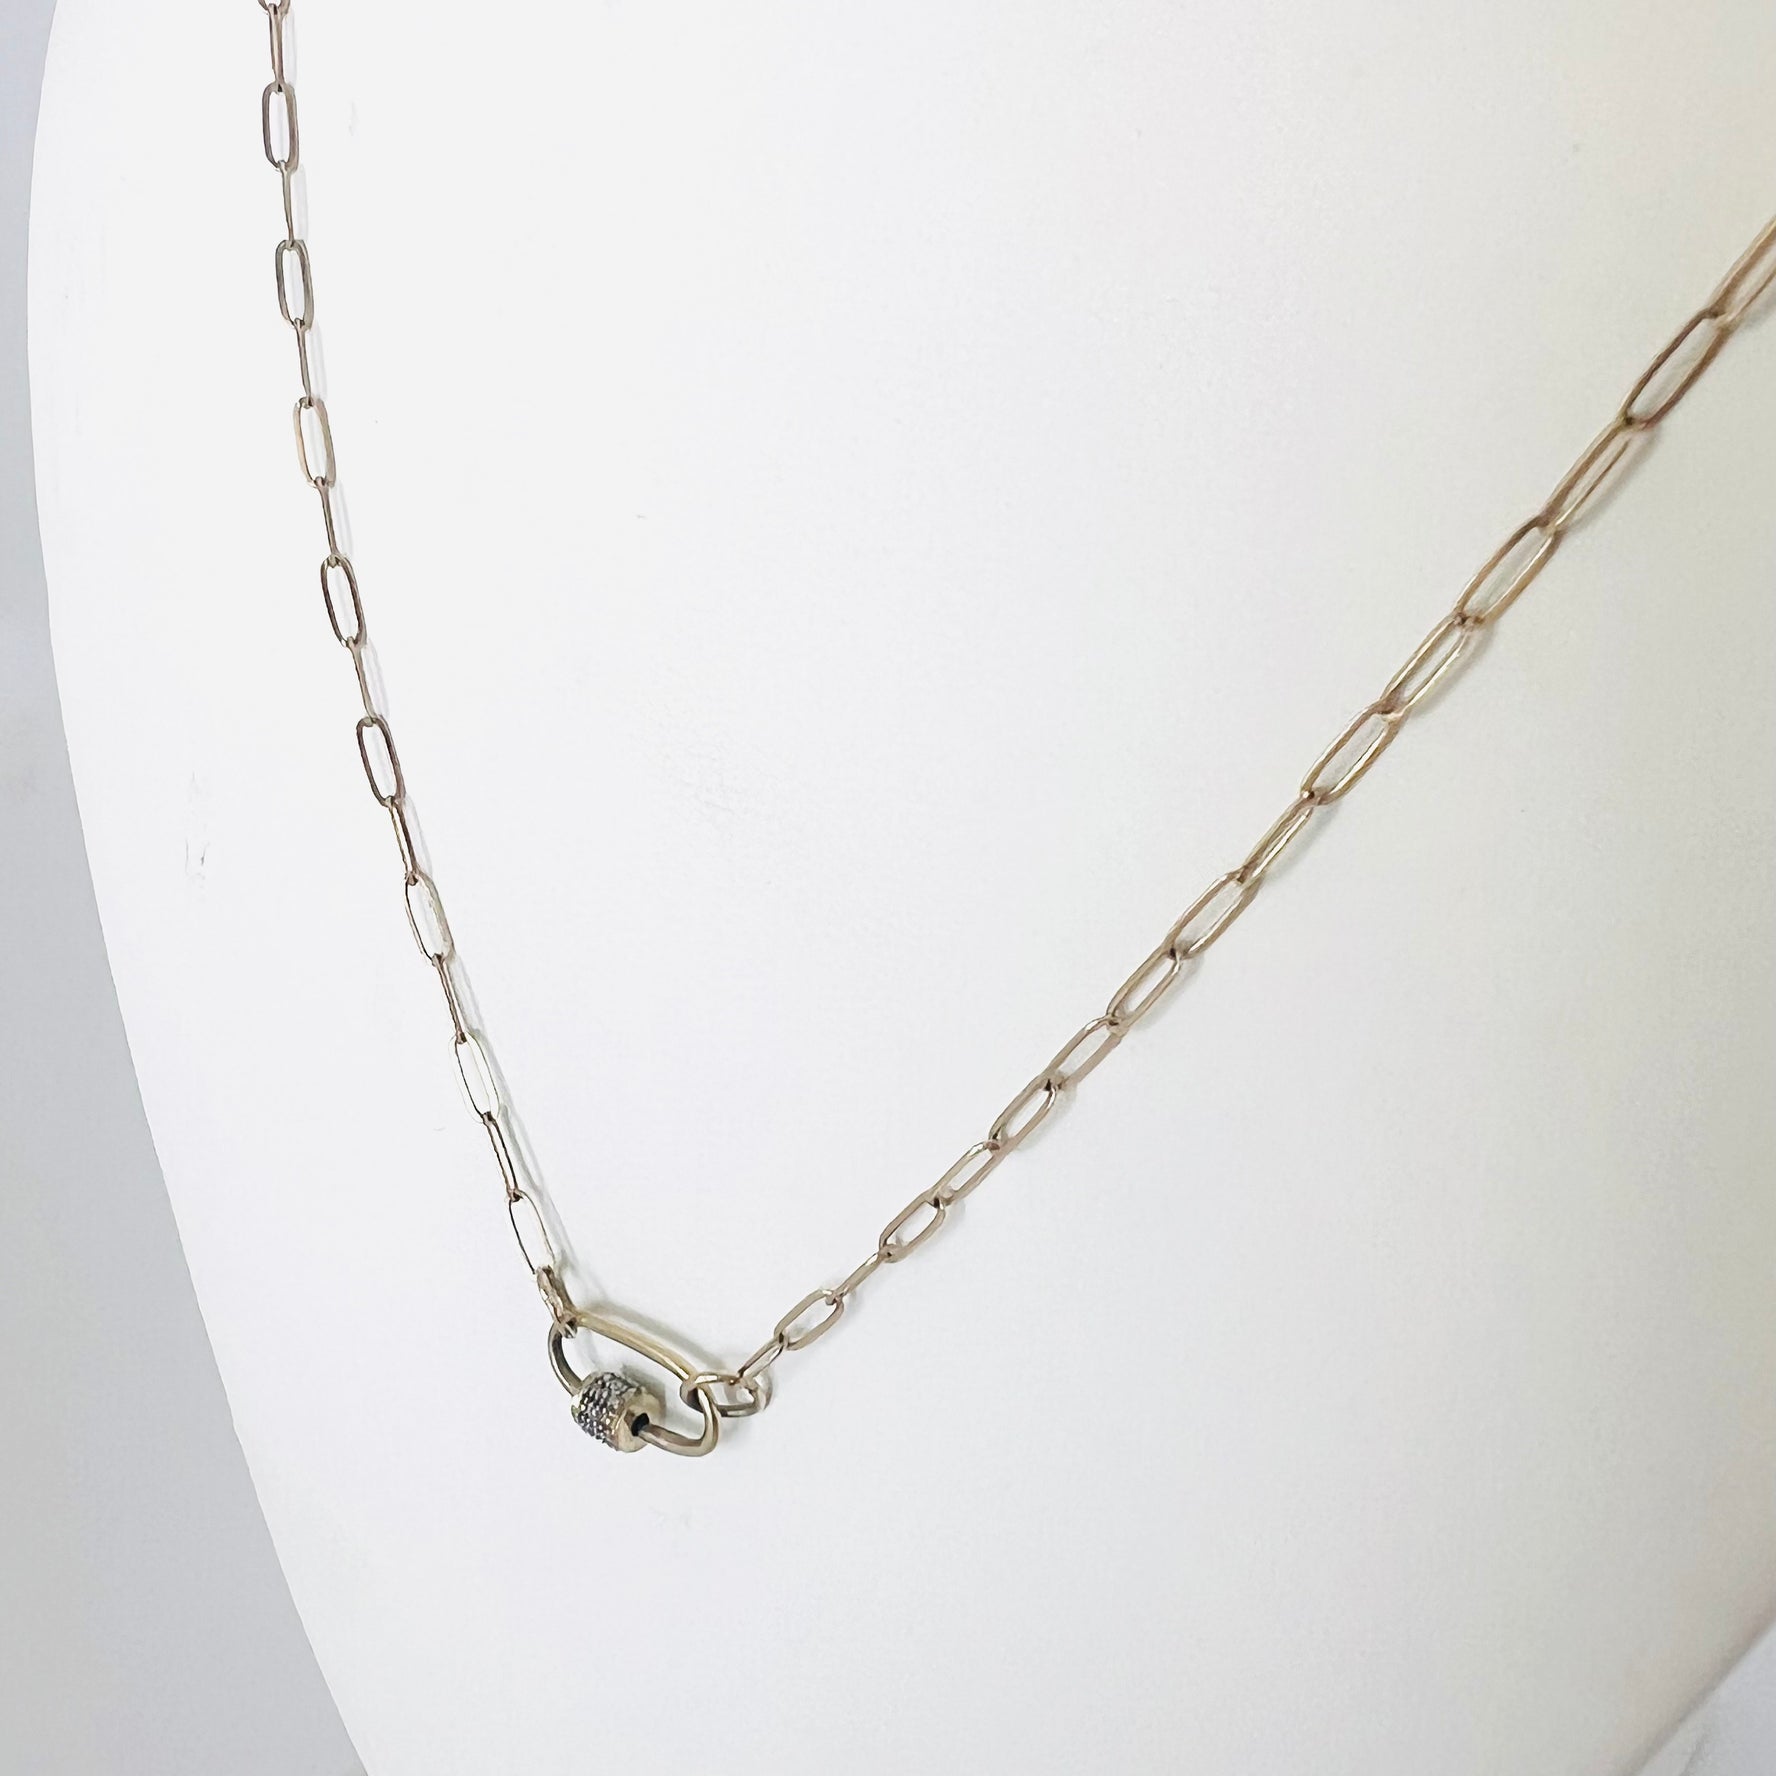 14k small paper clip chain necklace with 14k Diamond Carabiner